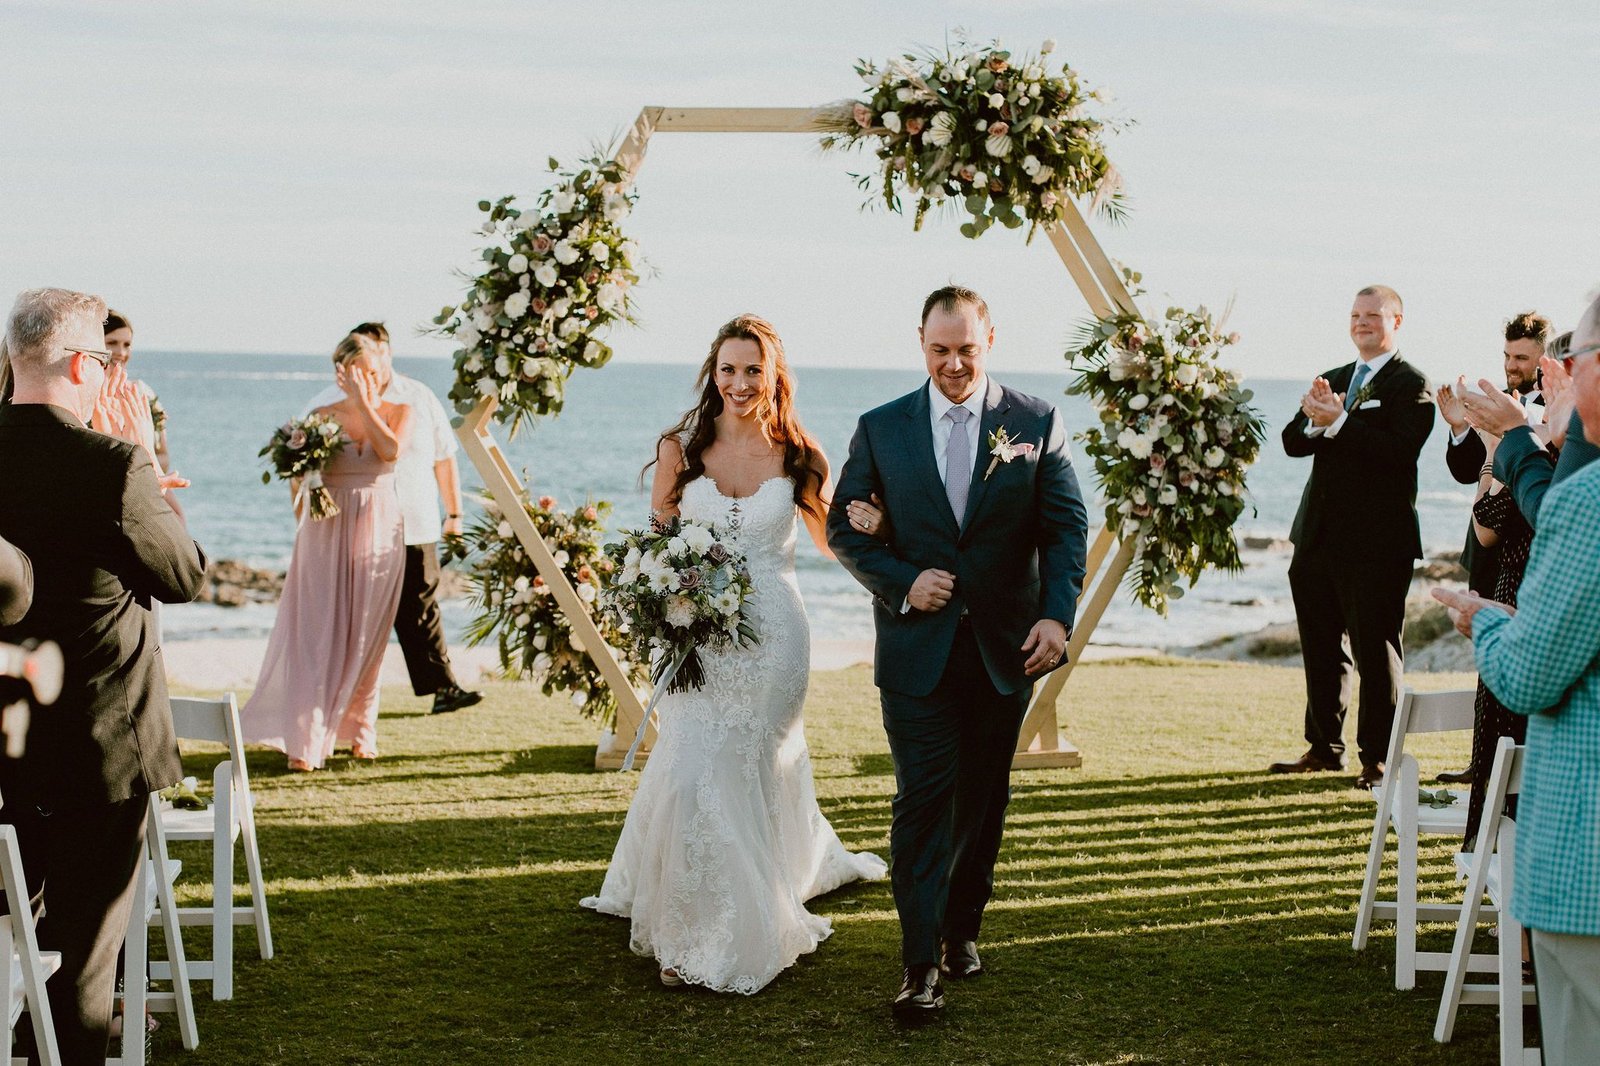 Bride and Groom after the Wedding Ceremony at Cabo del Sol. Destination Wedding Planning by Cabo Wedding Services. Wedding Designer Jesse Wolff